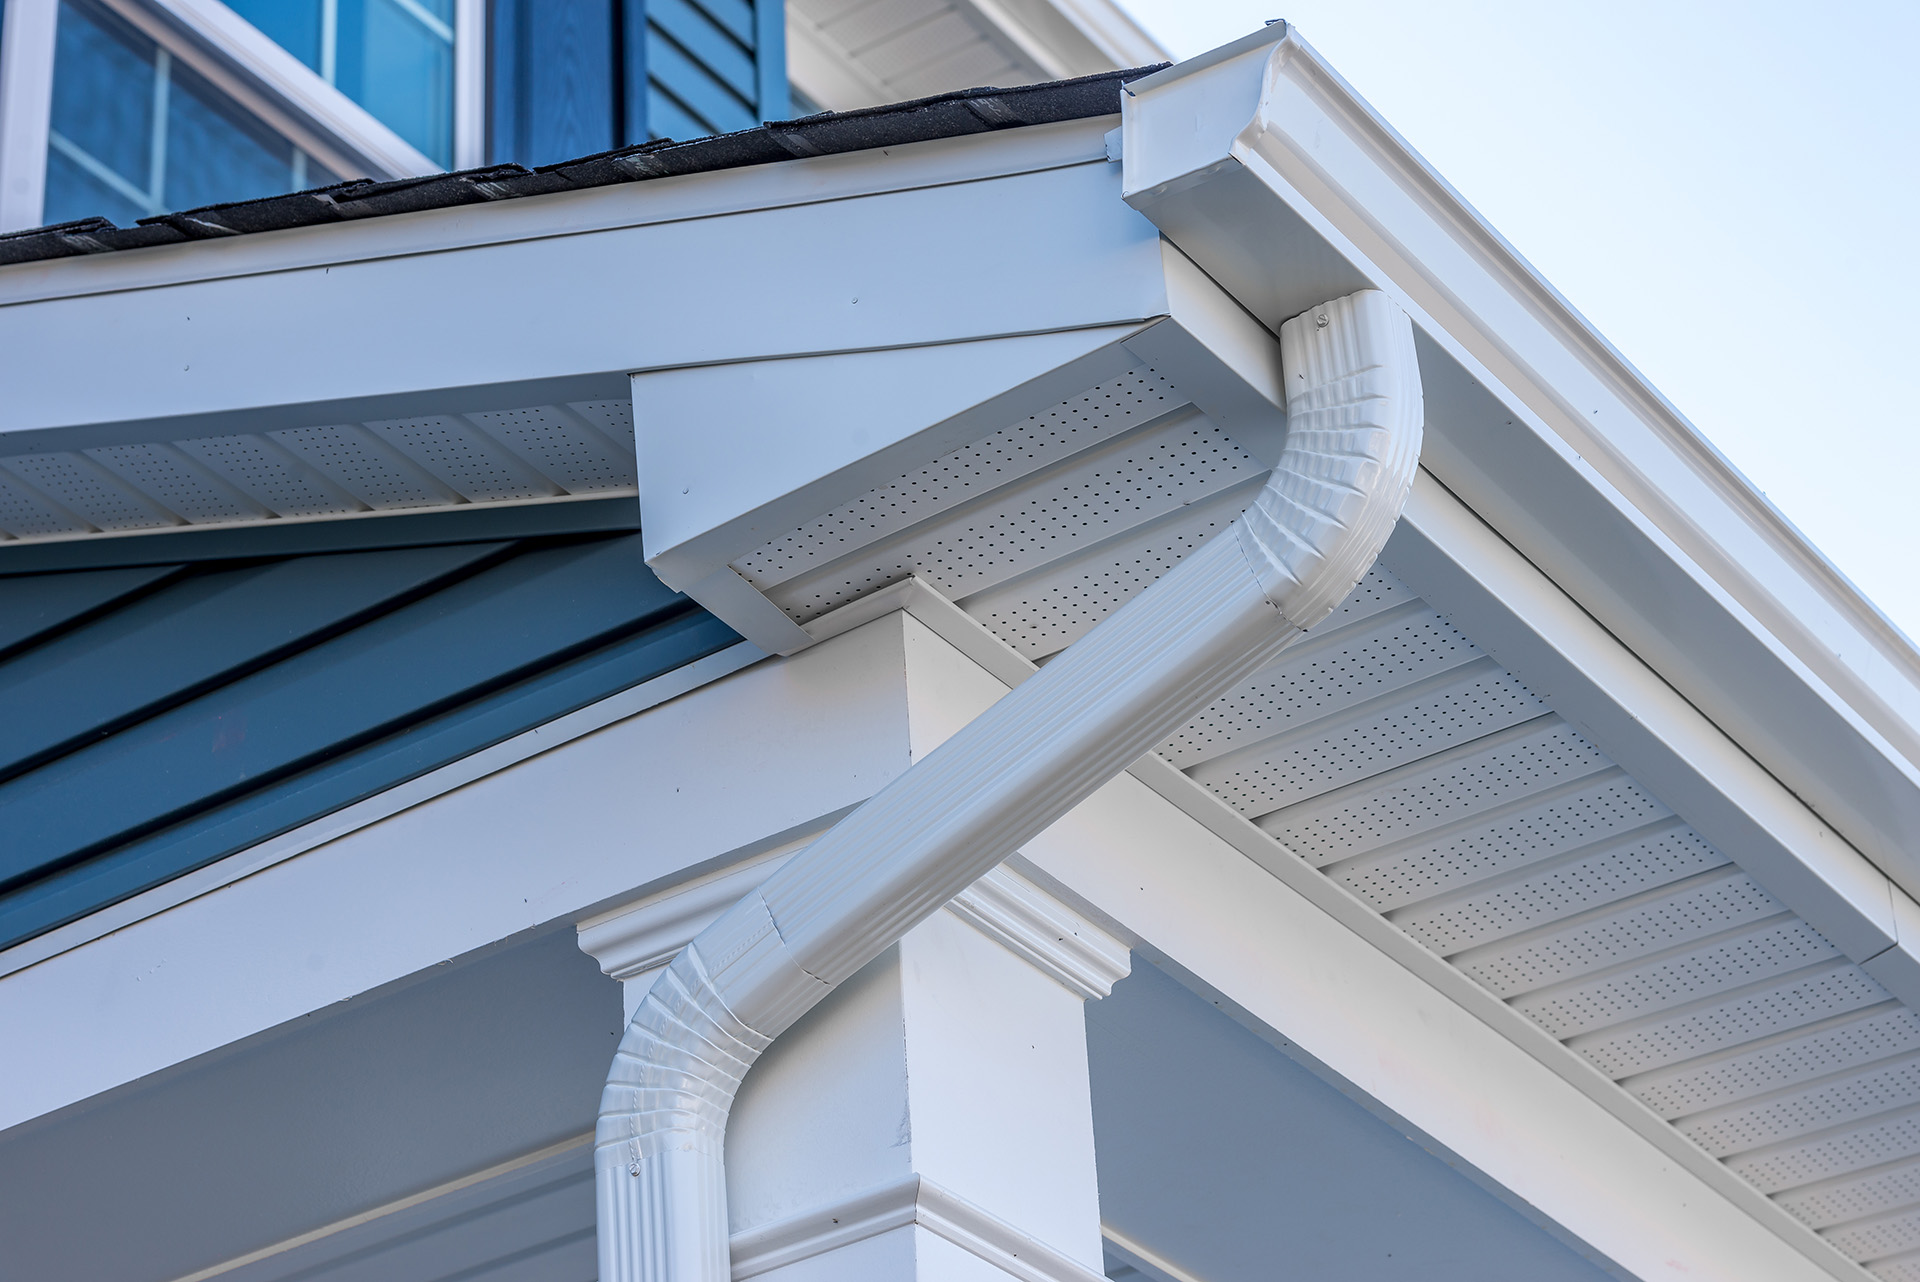 Colonial white gutter guard system, fascia, drip edge, soffit providing ventilation to the attic, with pacific blue vinyl horizontal siding at a luxury American single family home neighborhood